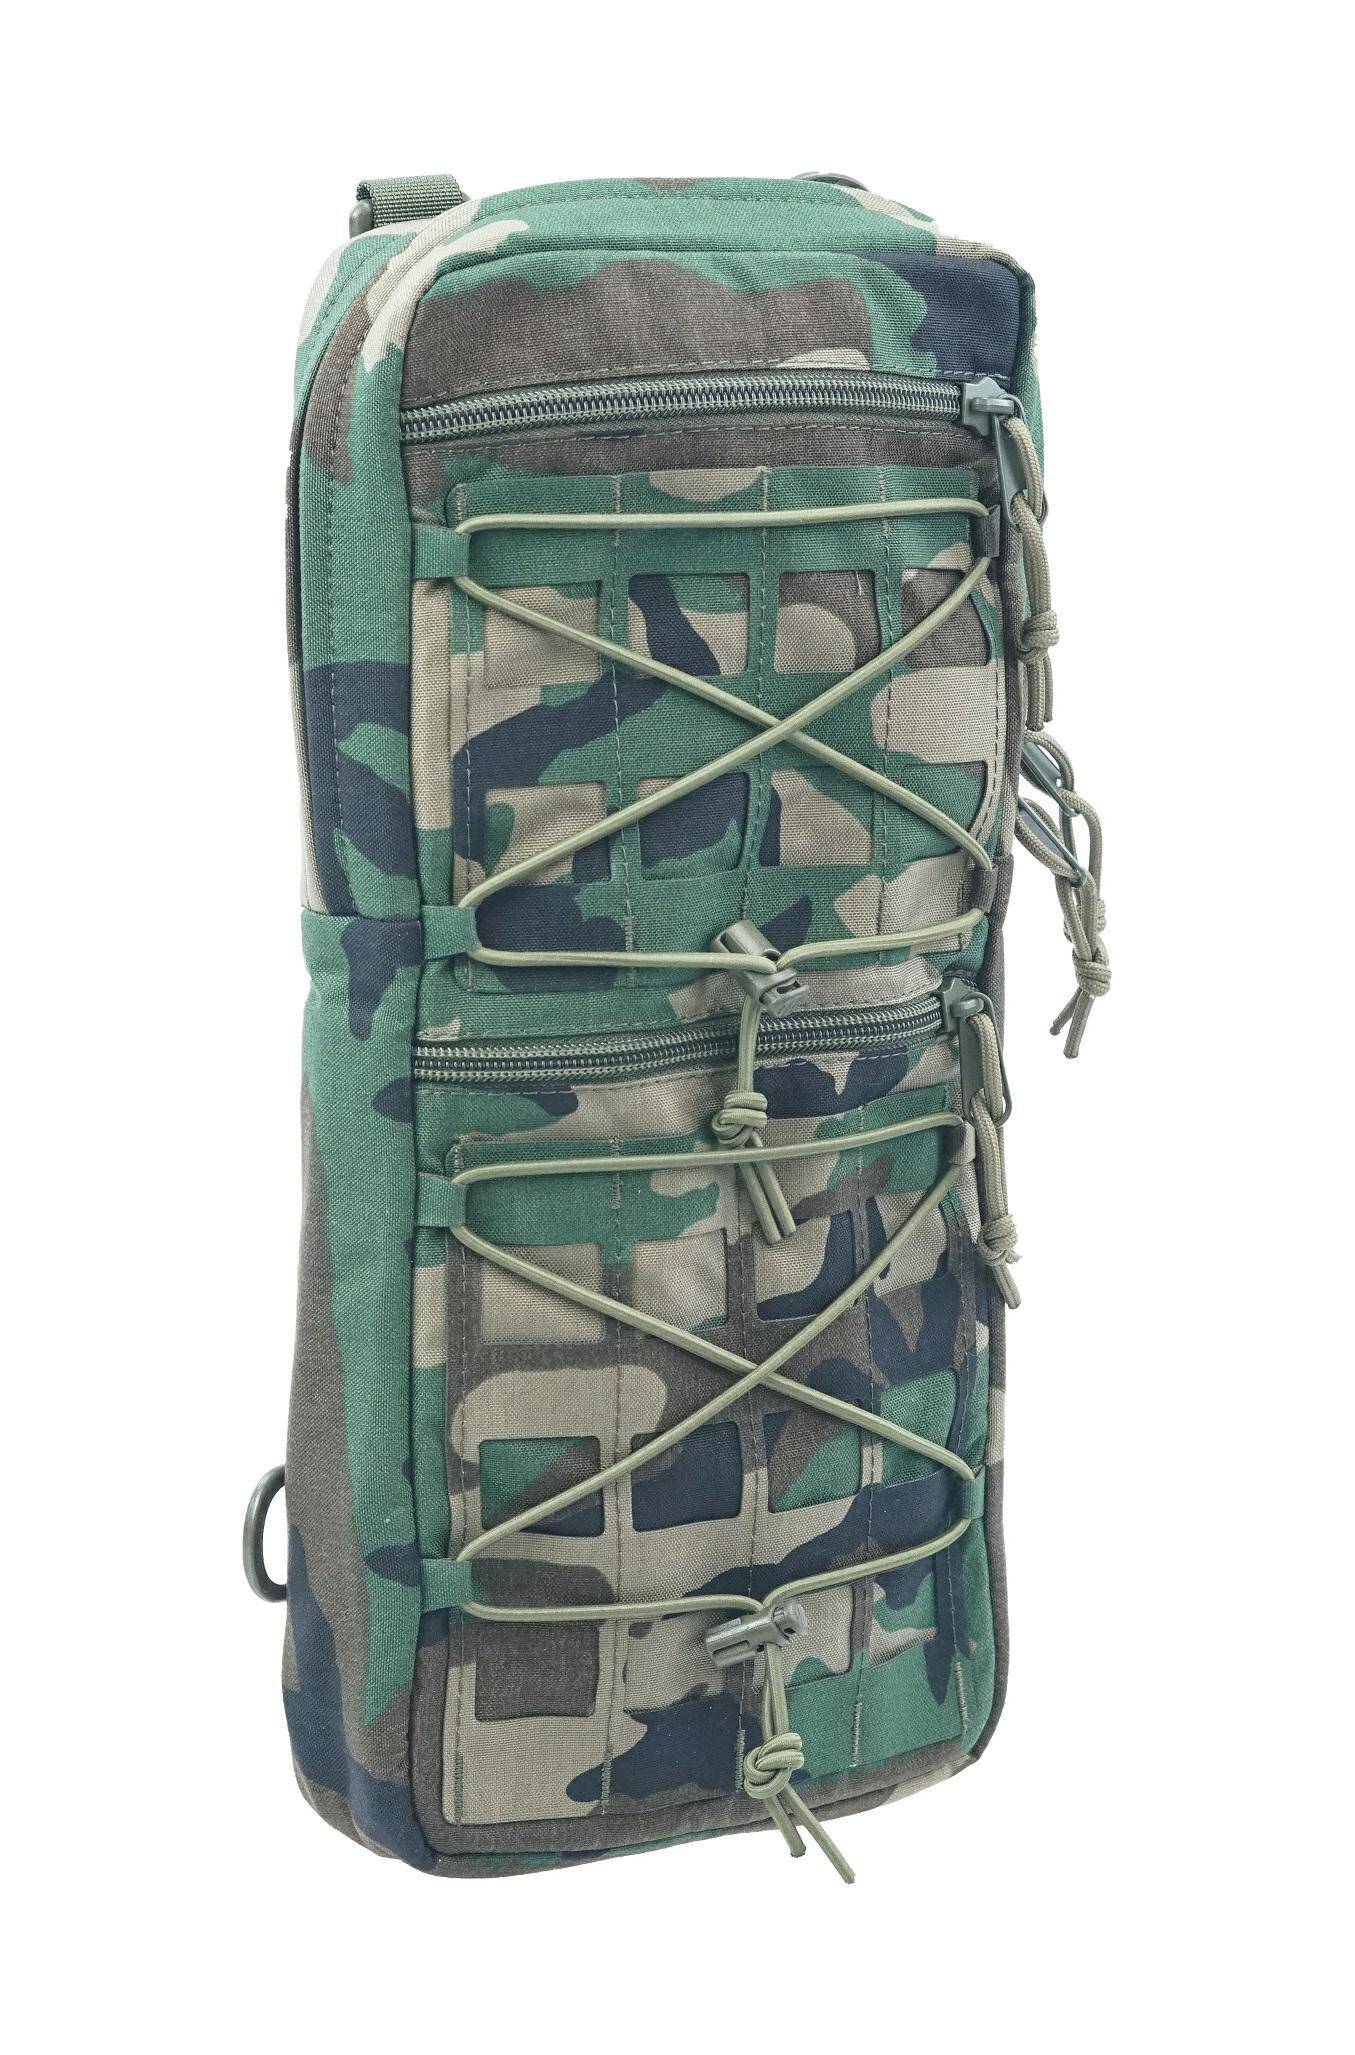 Hydration Pouch Large H1 M81 Woodland